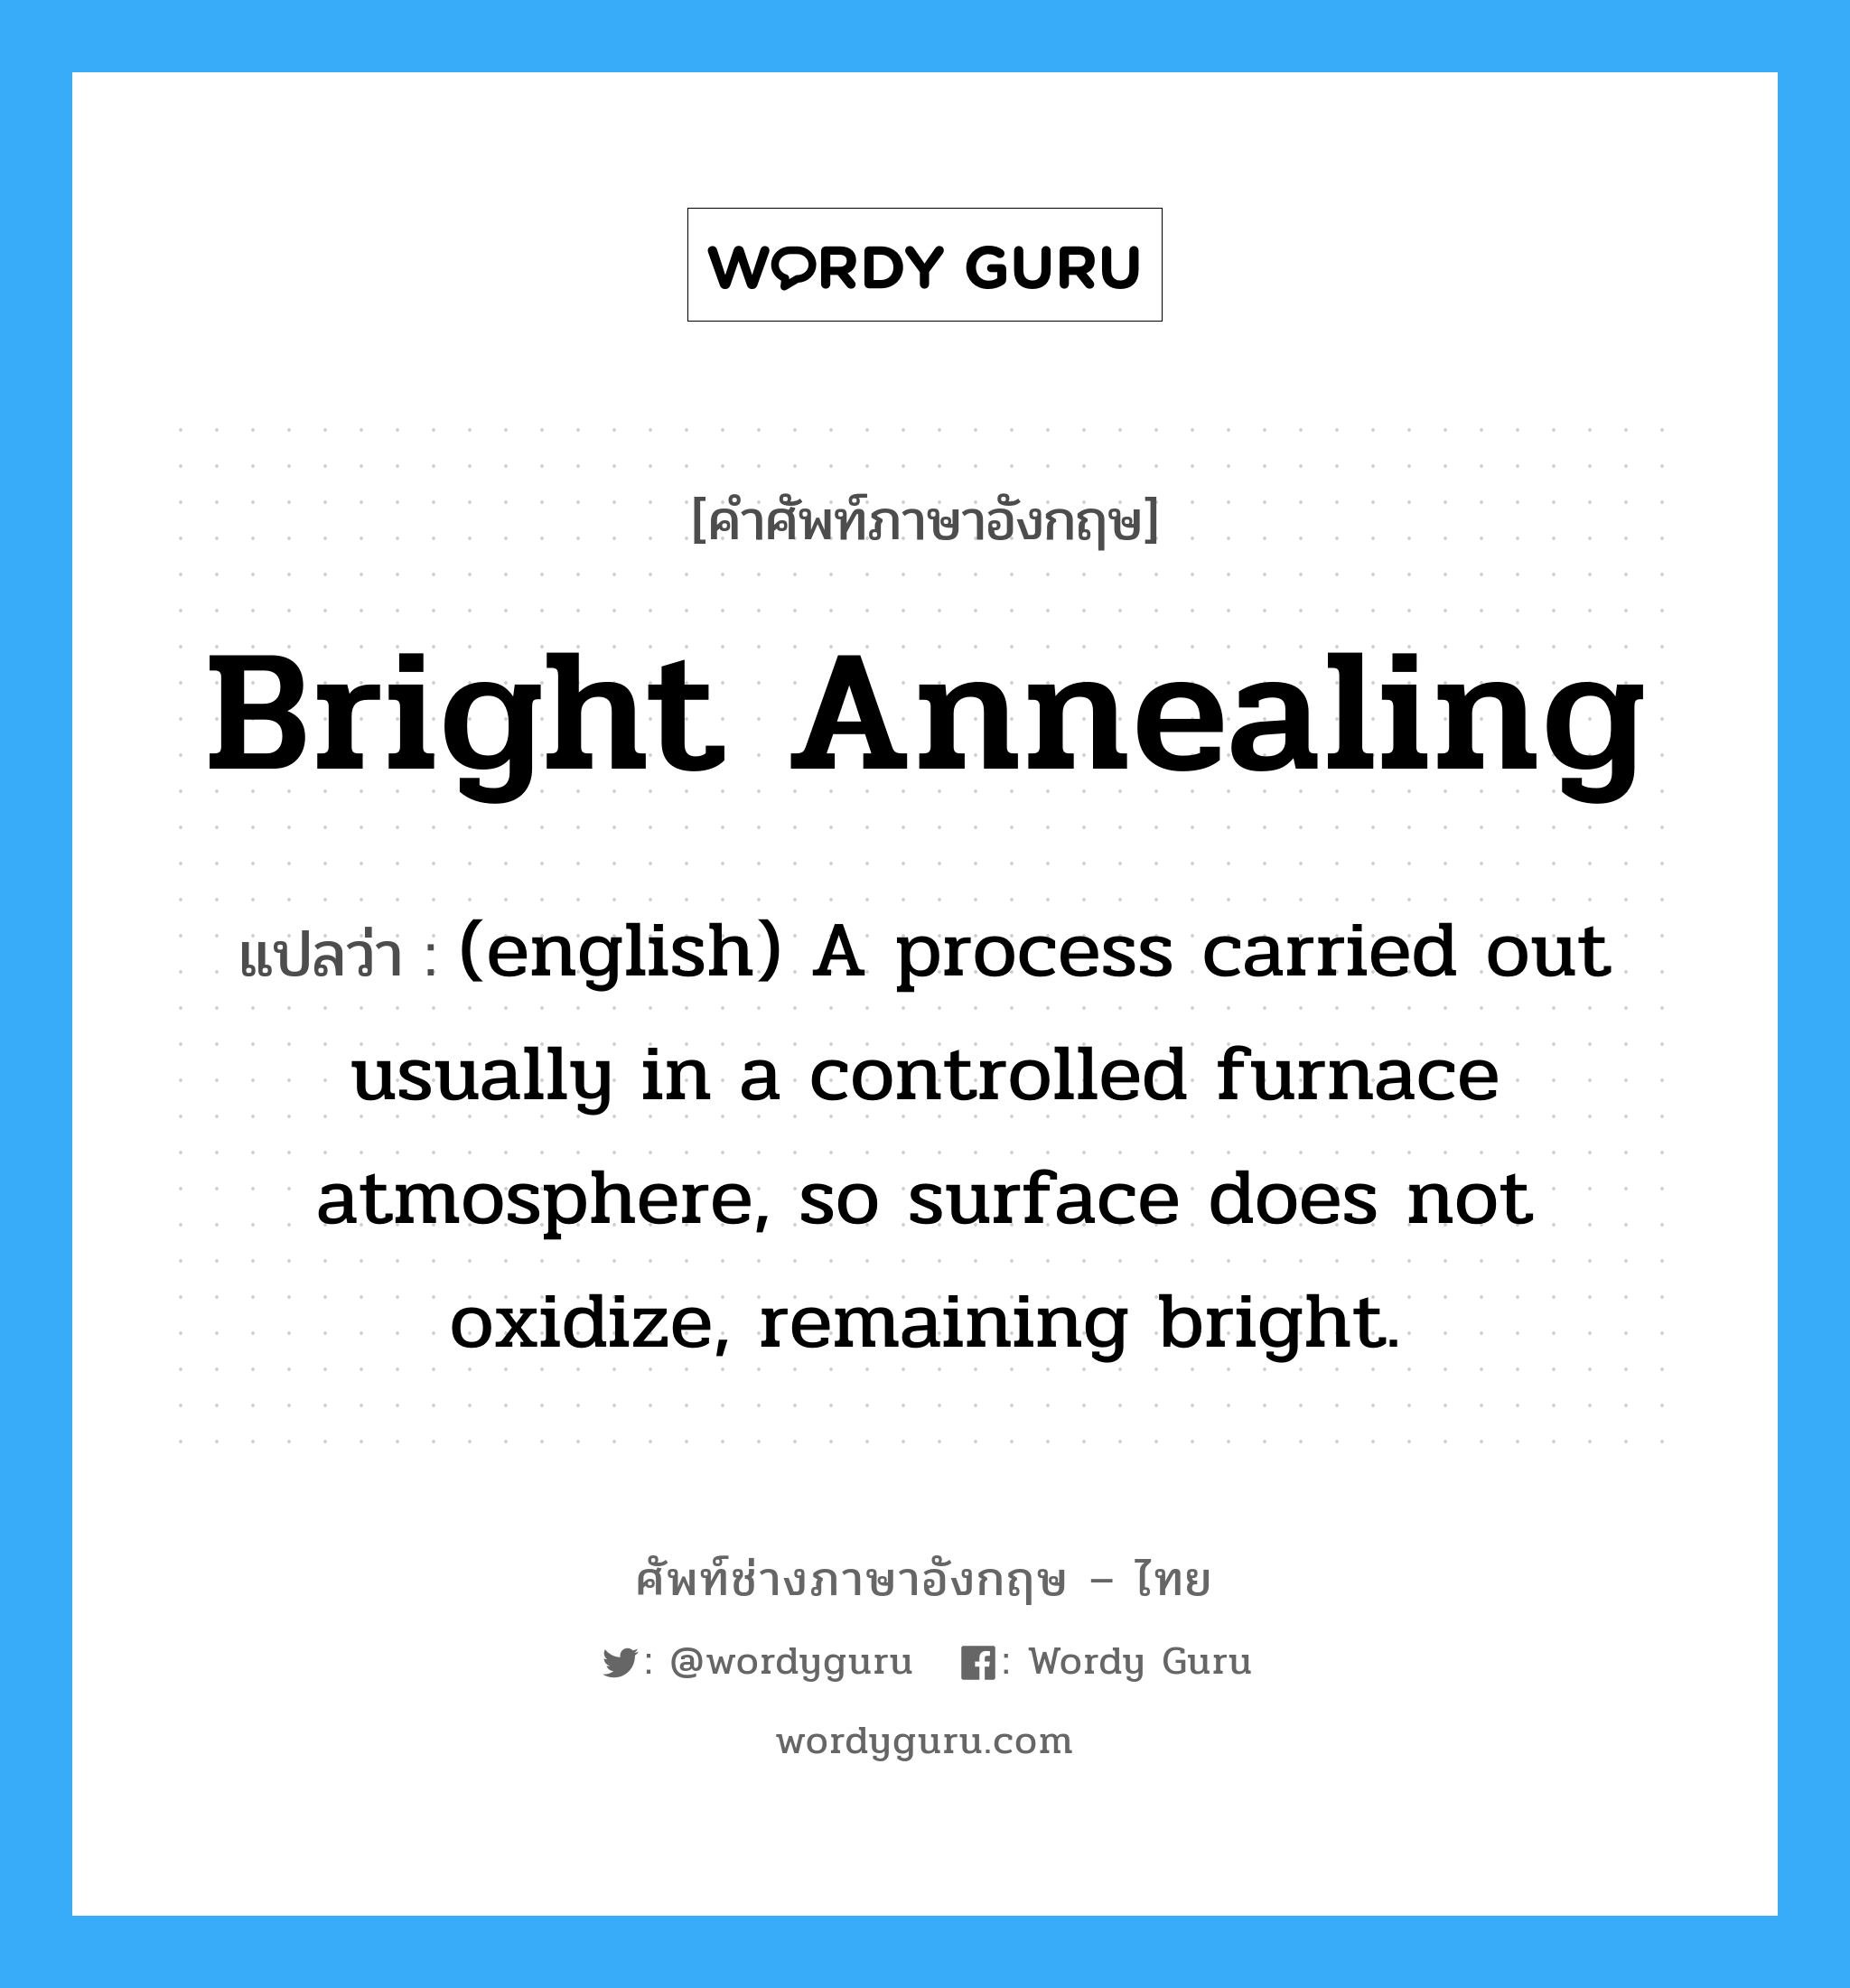 Bright Annealing แปลว่า?, คำศัพท์ช่างภาษาอังกฤษ - ไทย Bright Annealing คำศัพท์ภาษาอังกฤษ Bright Annealing แปลว่า (english) A process carried out usually in a controlled furnace atmosphere, so surface does not oxidize, remaining bright.